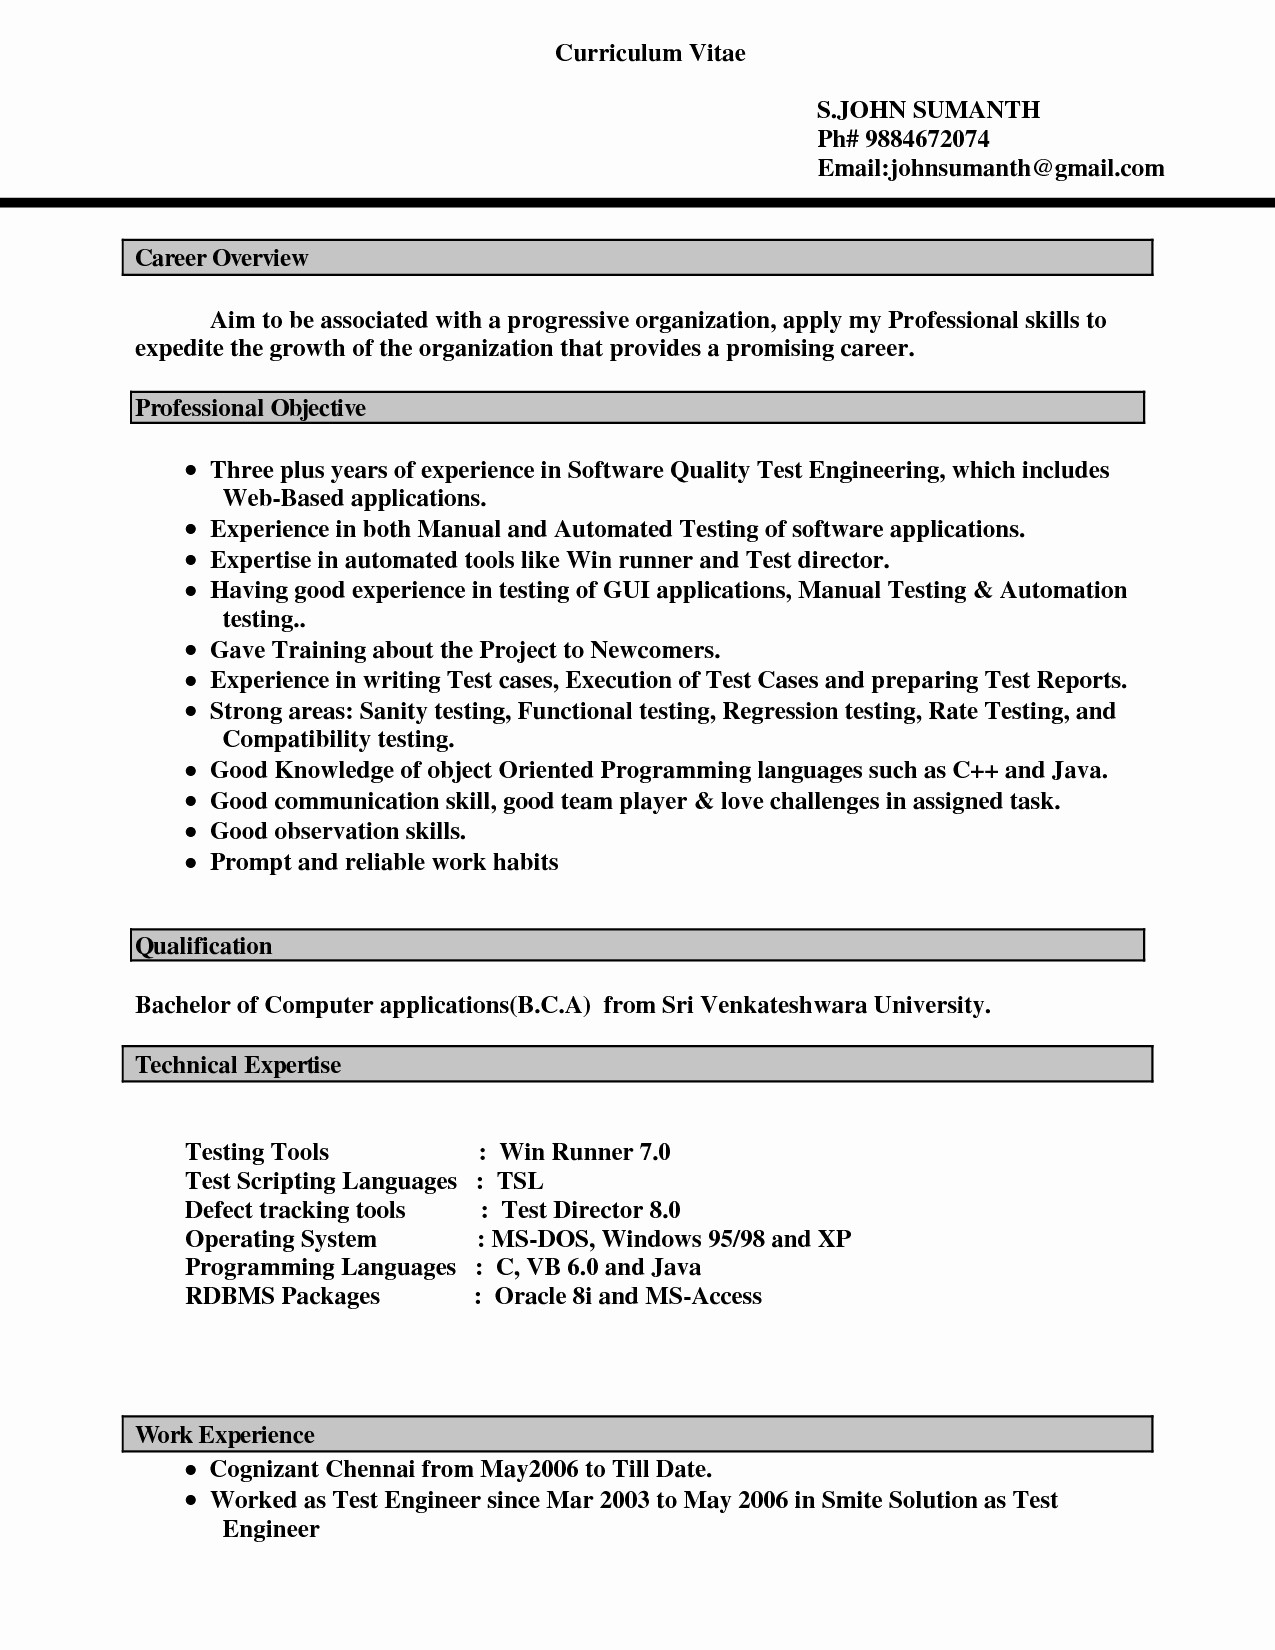 Resume Template On Word 2007 Lovely Resume Template Microsoft Word 2017